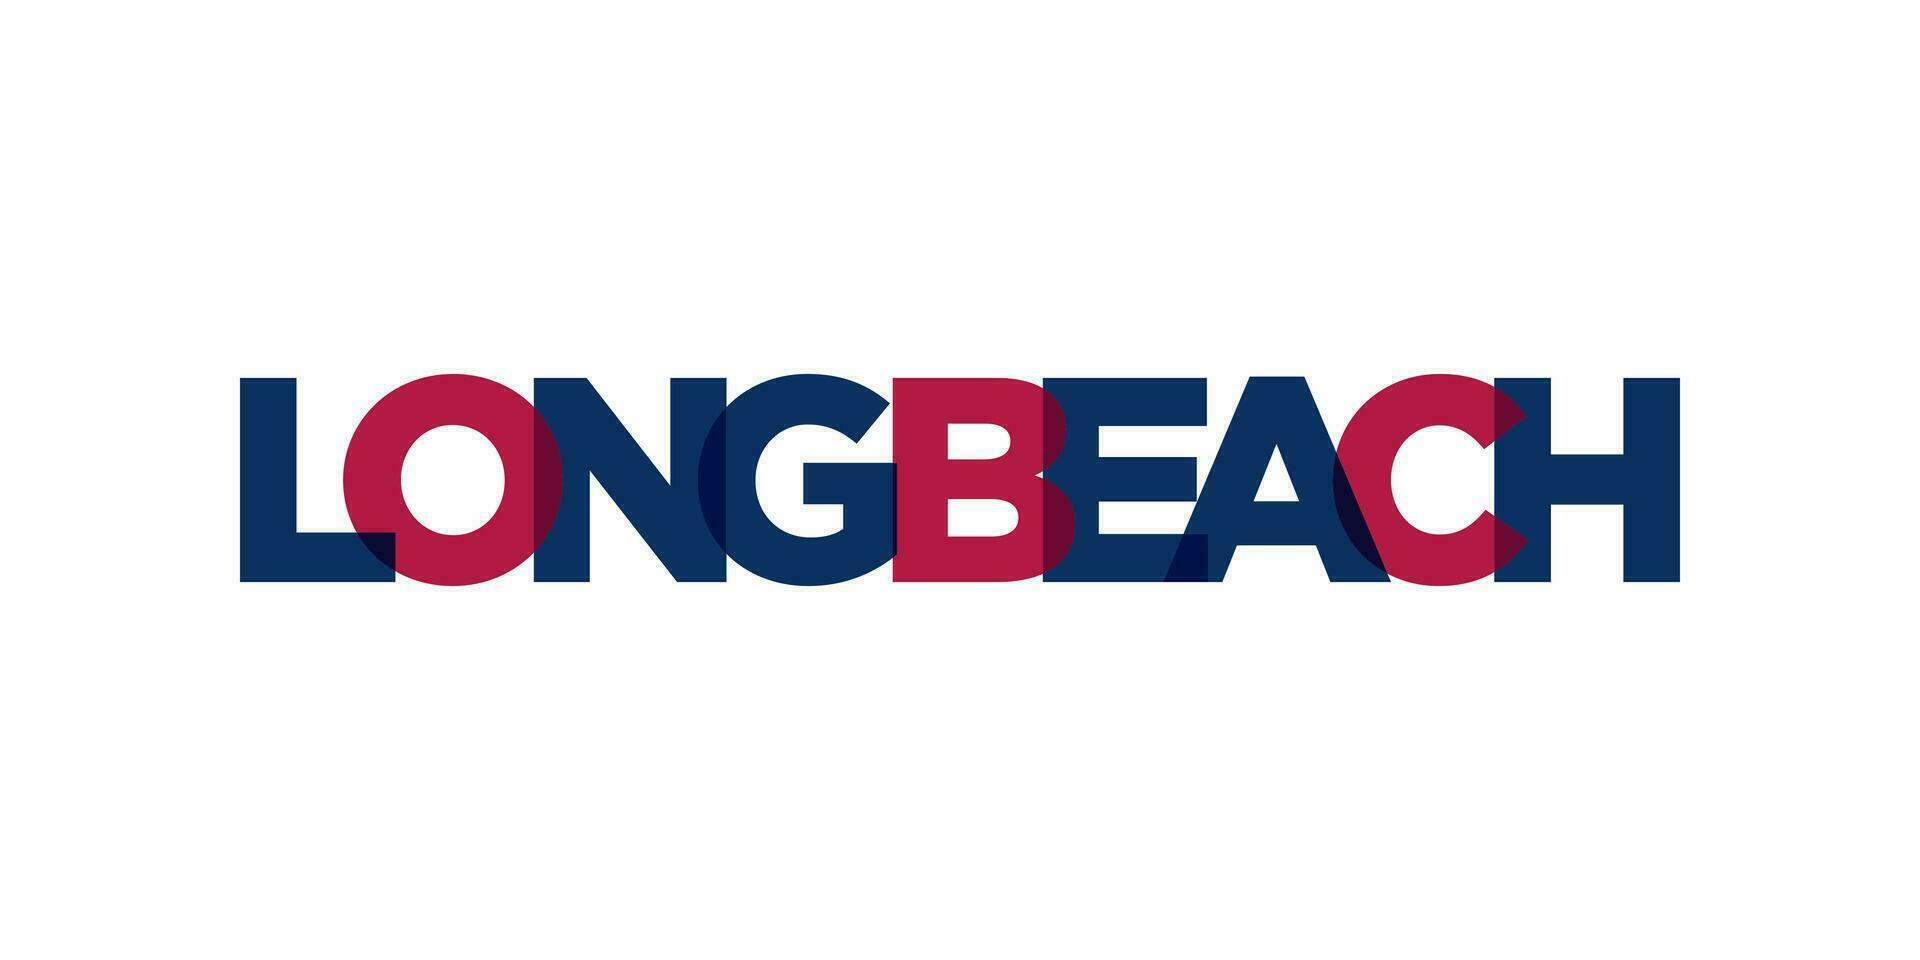 Long Beach, California, USA typography slogan design. America logo with graphic city lettering for print and web. vector